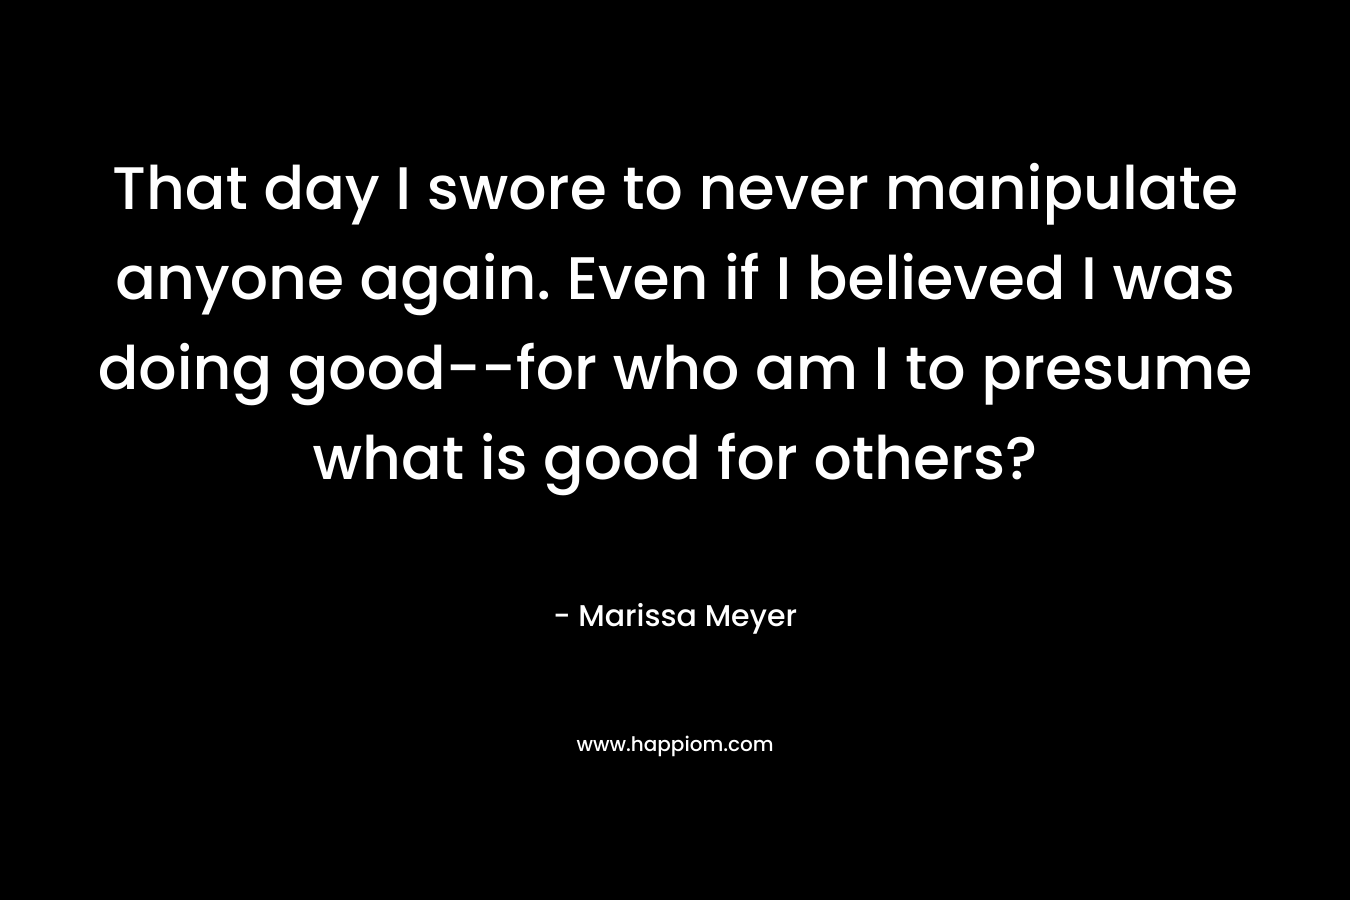 That day I swore to never manipulate anyone again. Even if I believed I was doing good–for who am I to presume what is good for others? – Marissa Meyer